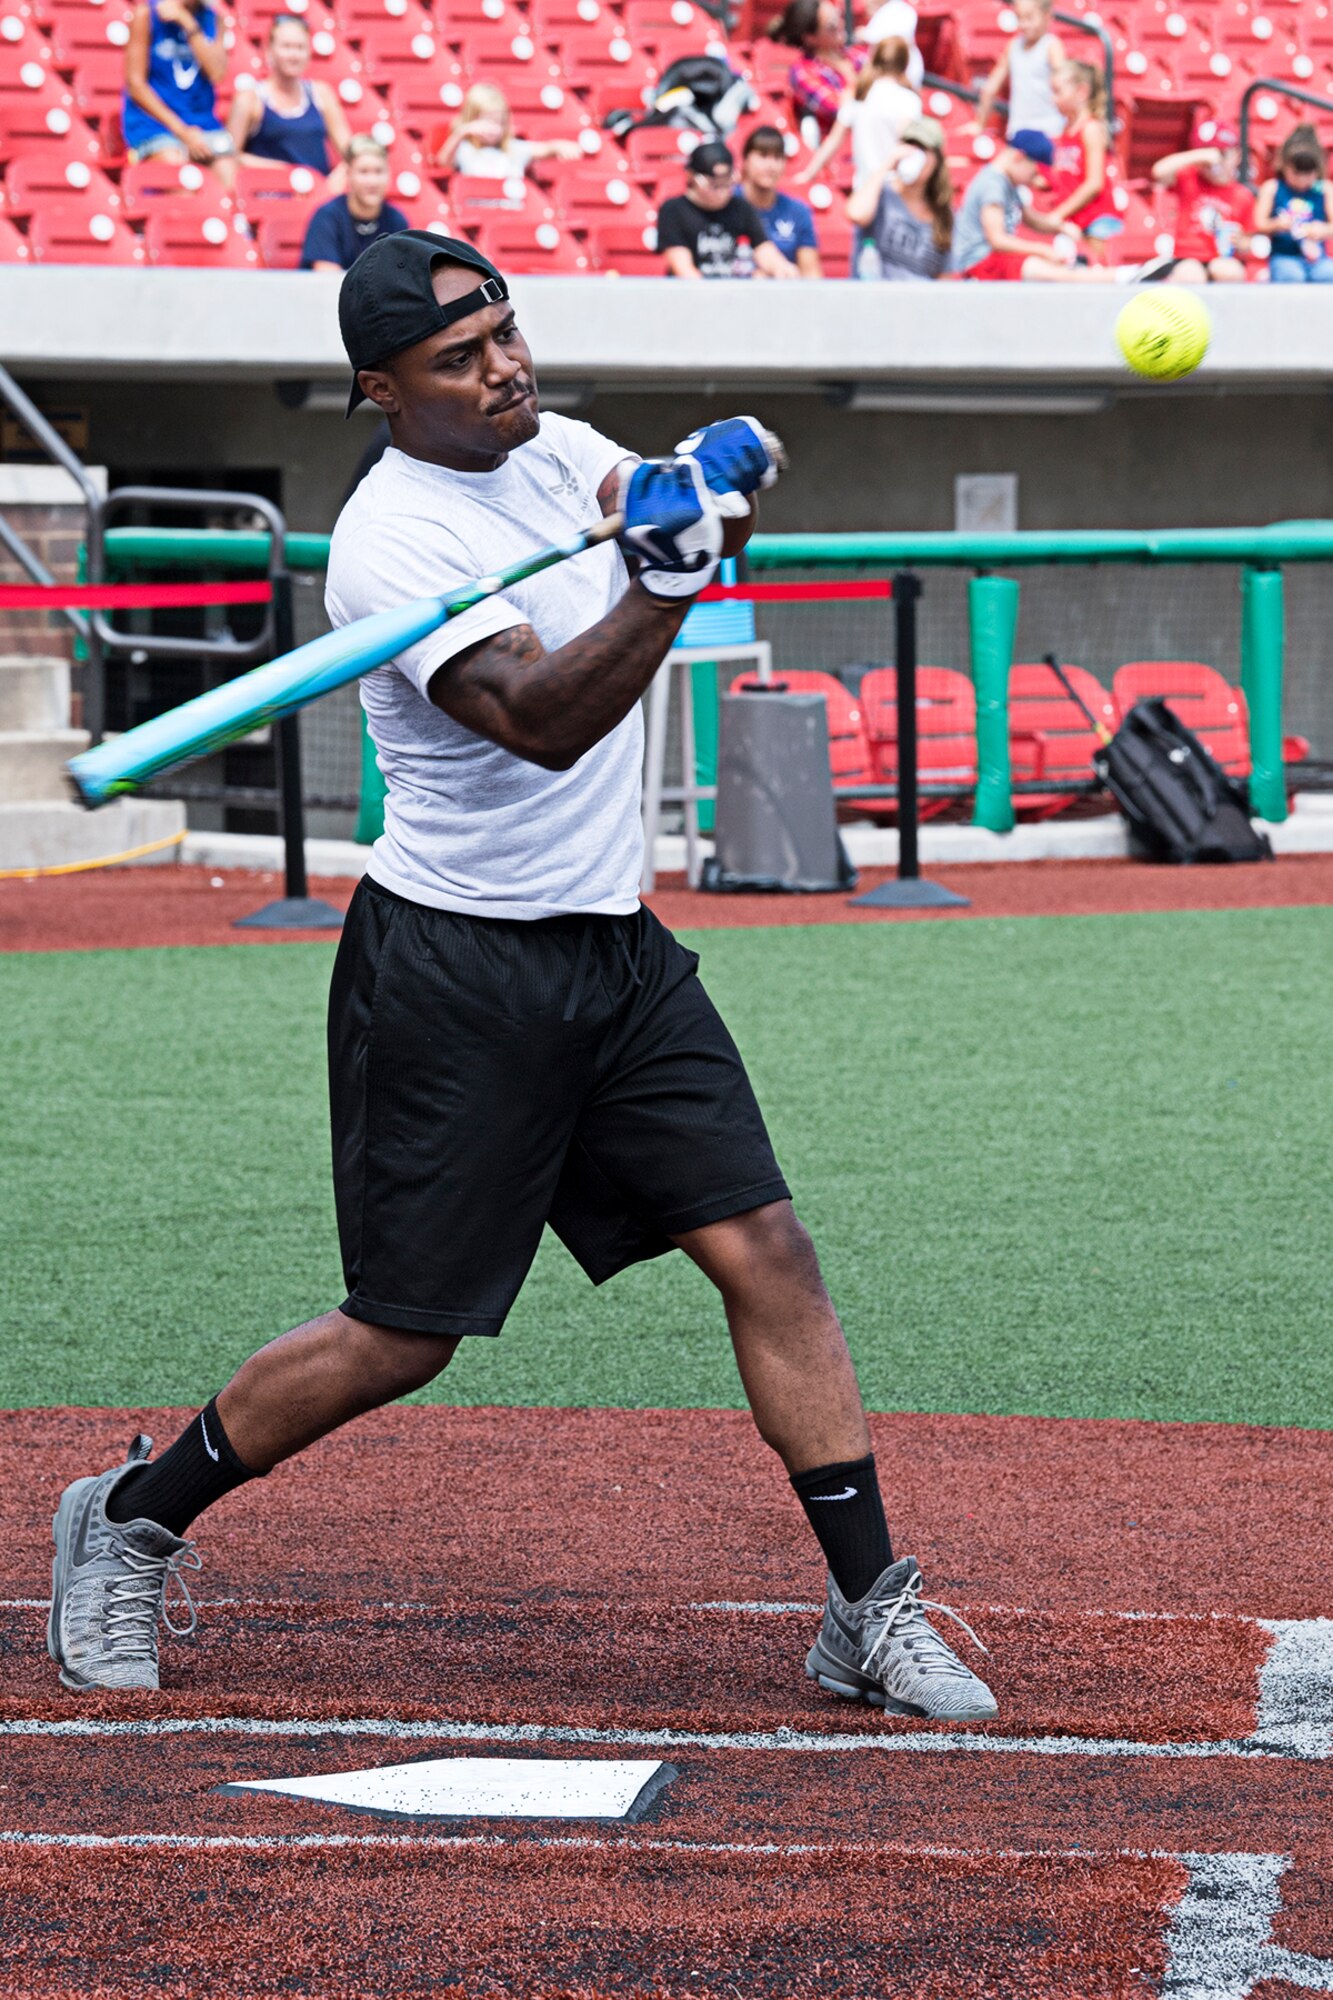 Chris Cockle, 434th Force Support Squadron, looks to get all of a pitch during an inter-service homerun derby contest Aug. 18, 2018 at Kokomo Municipal Stadium, in Kokomo, Ind. Teams from the Army, Navy, Air Force and Marines engaged in the friendly competition. (U.S. Air Force photo/ Douglas Hays)